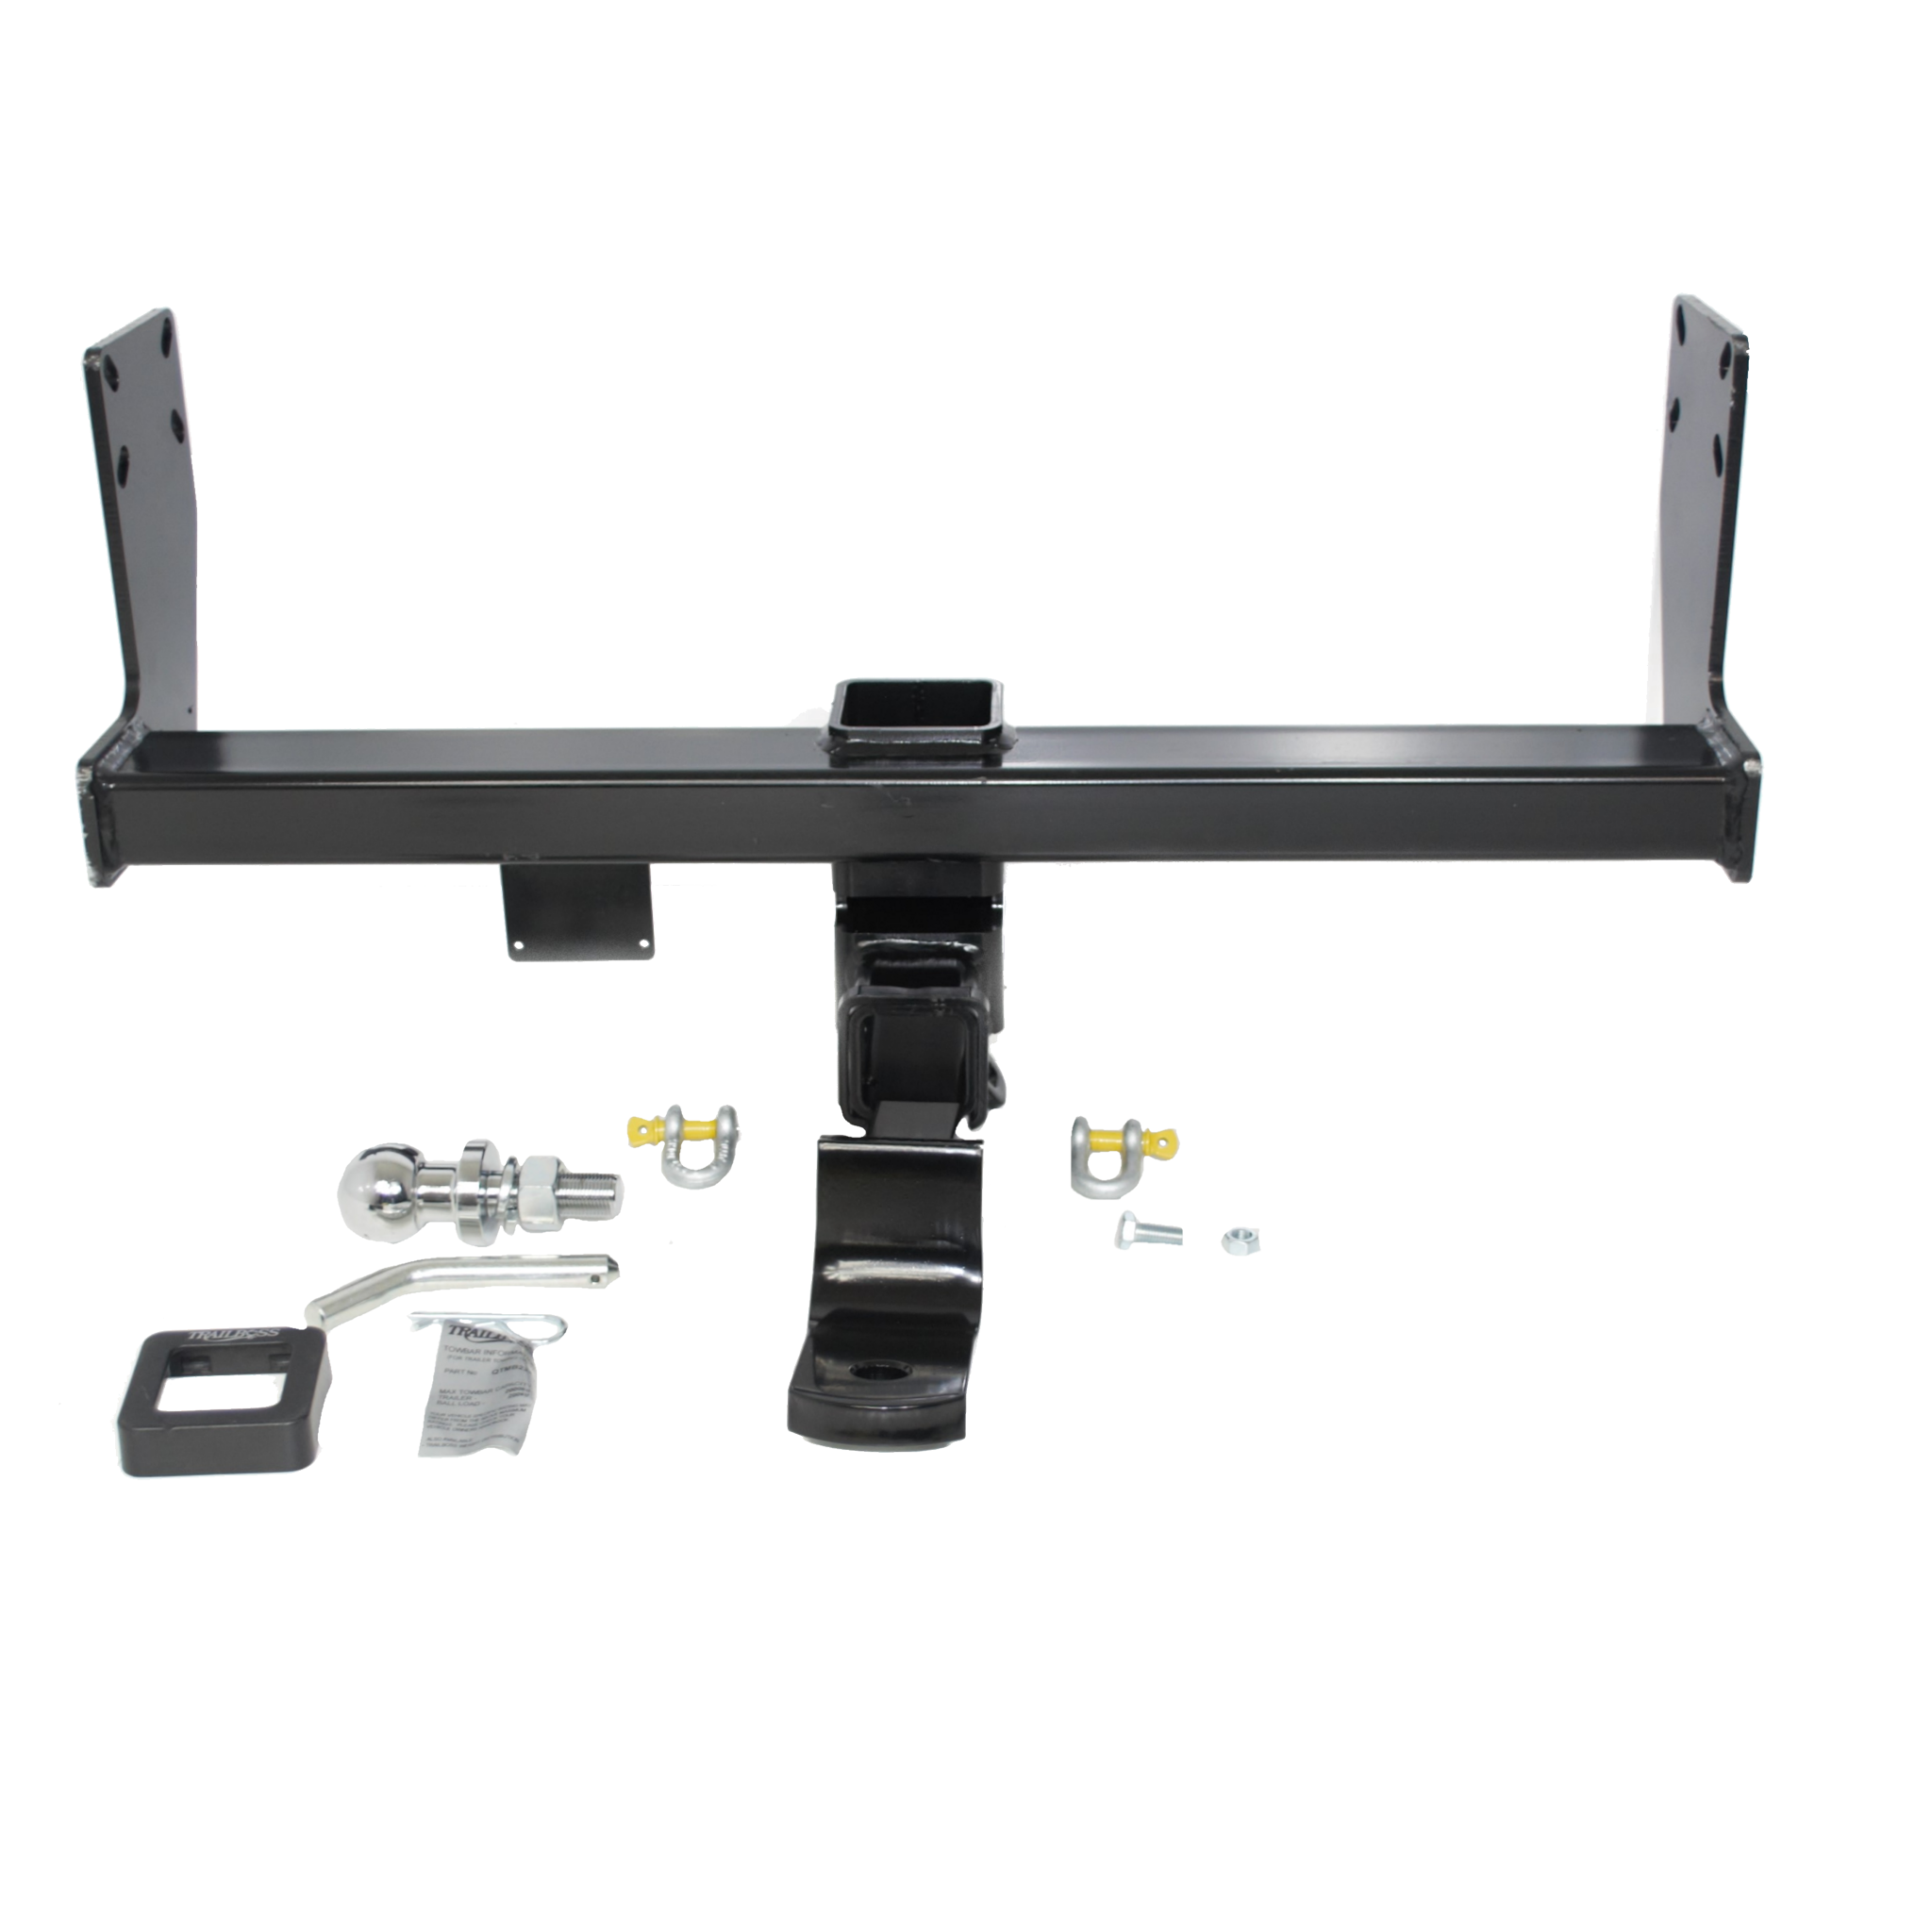 Volkswagen Crafter Cab Chassis With Single Rear Wheels 10/2006 - 07/2017 - Towbar Kit - HEAVY DUTY PREMIUM